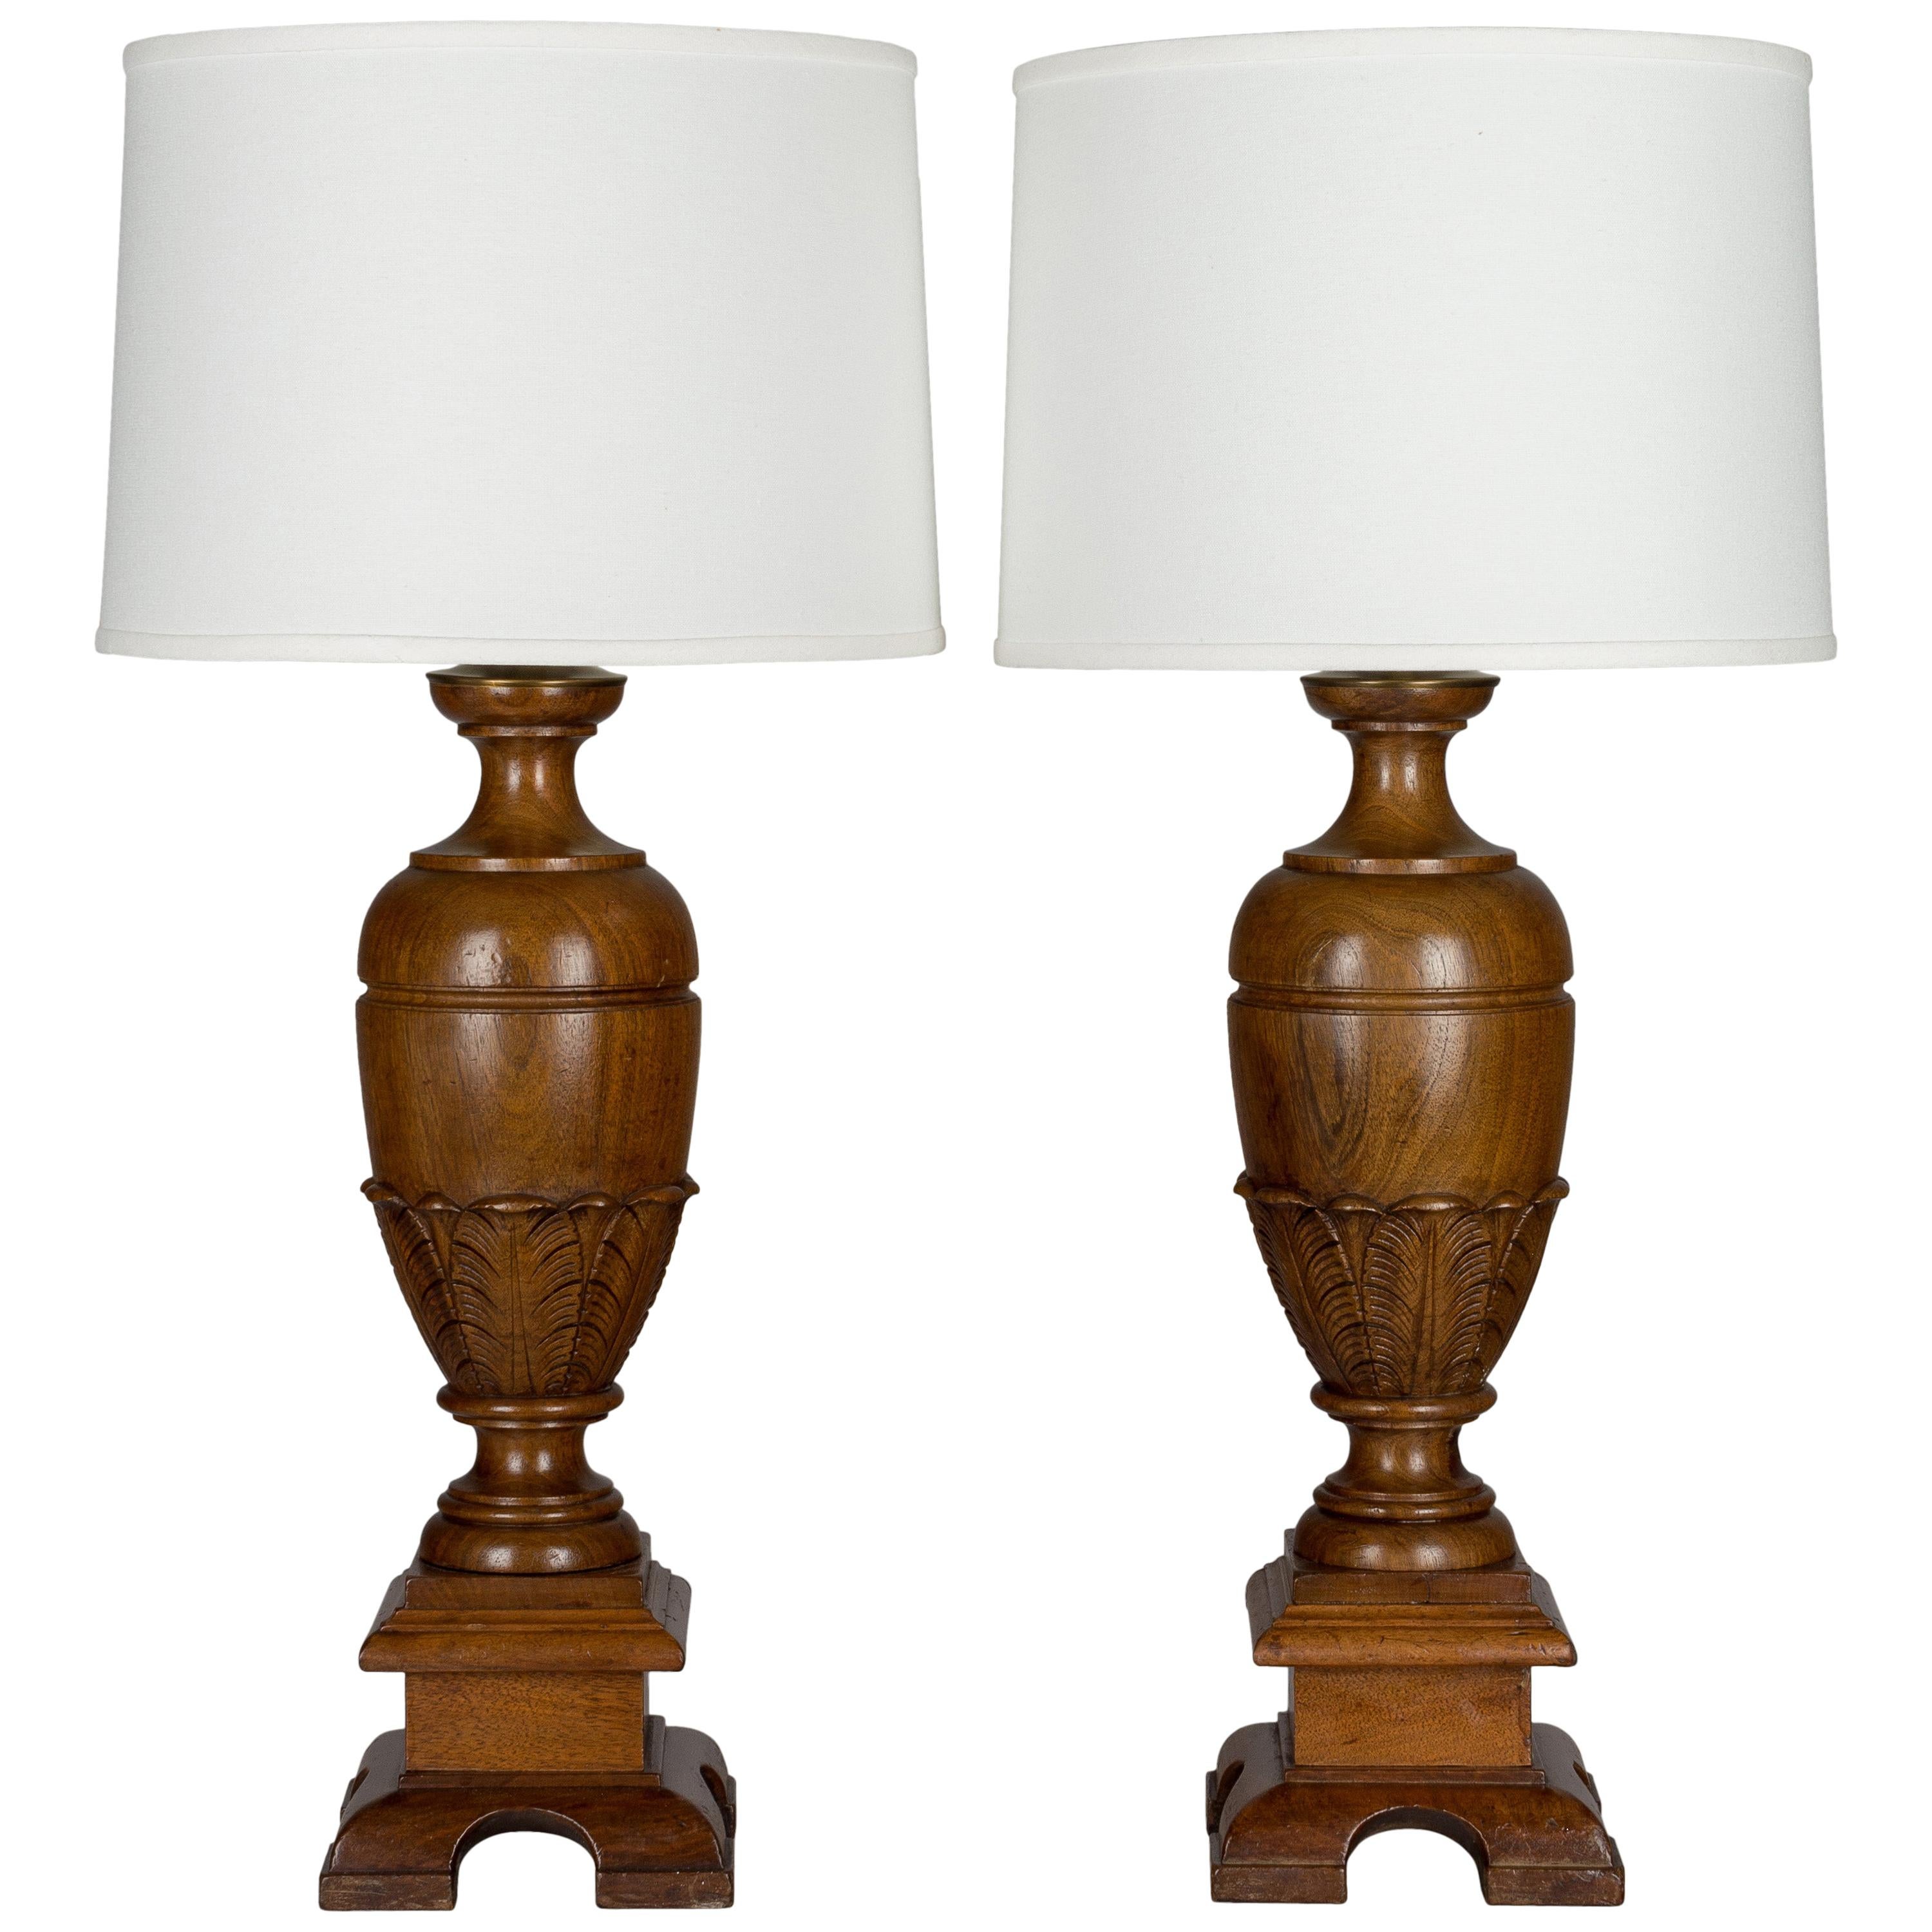 Pair of French Walnut Baluster Form Lamps